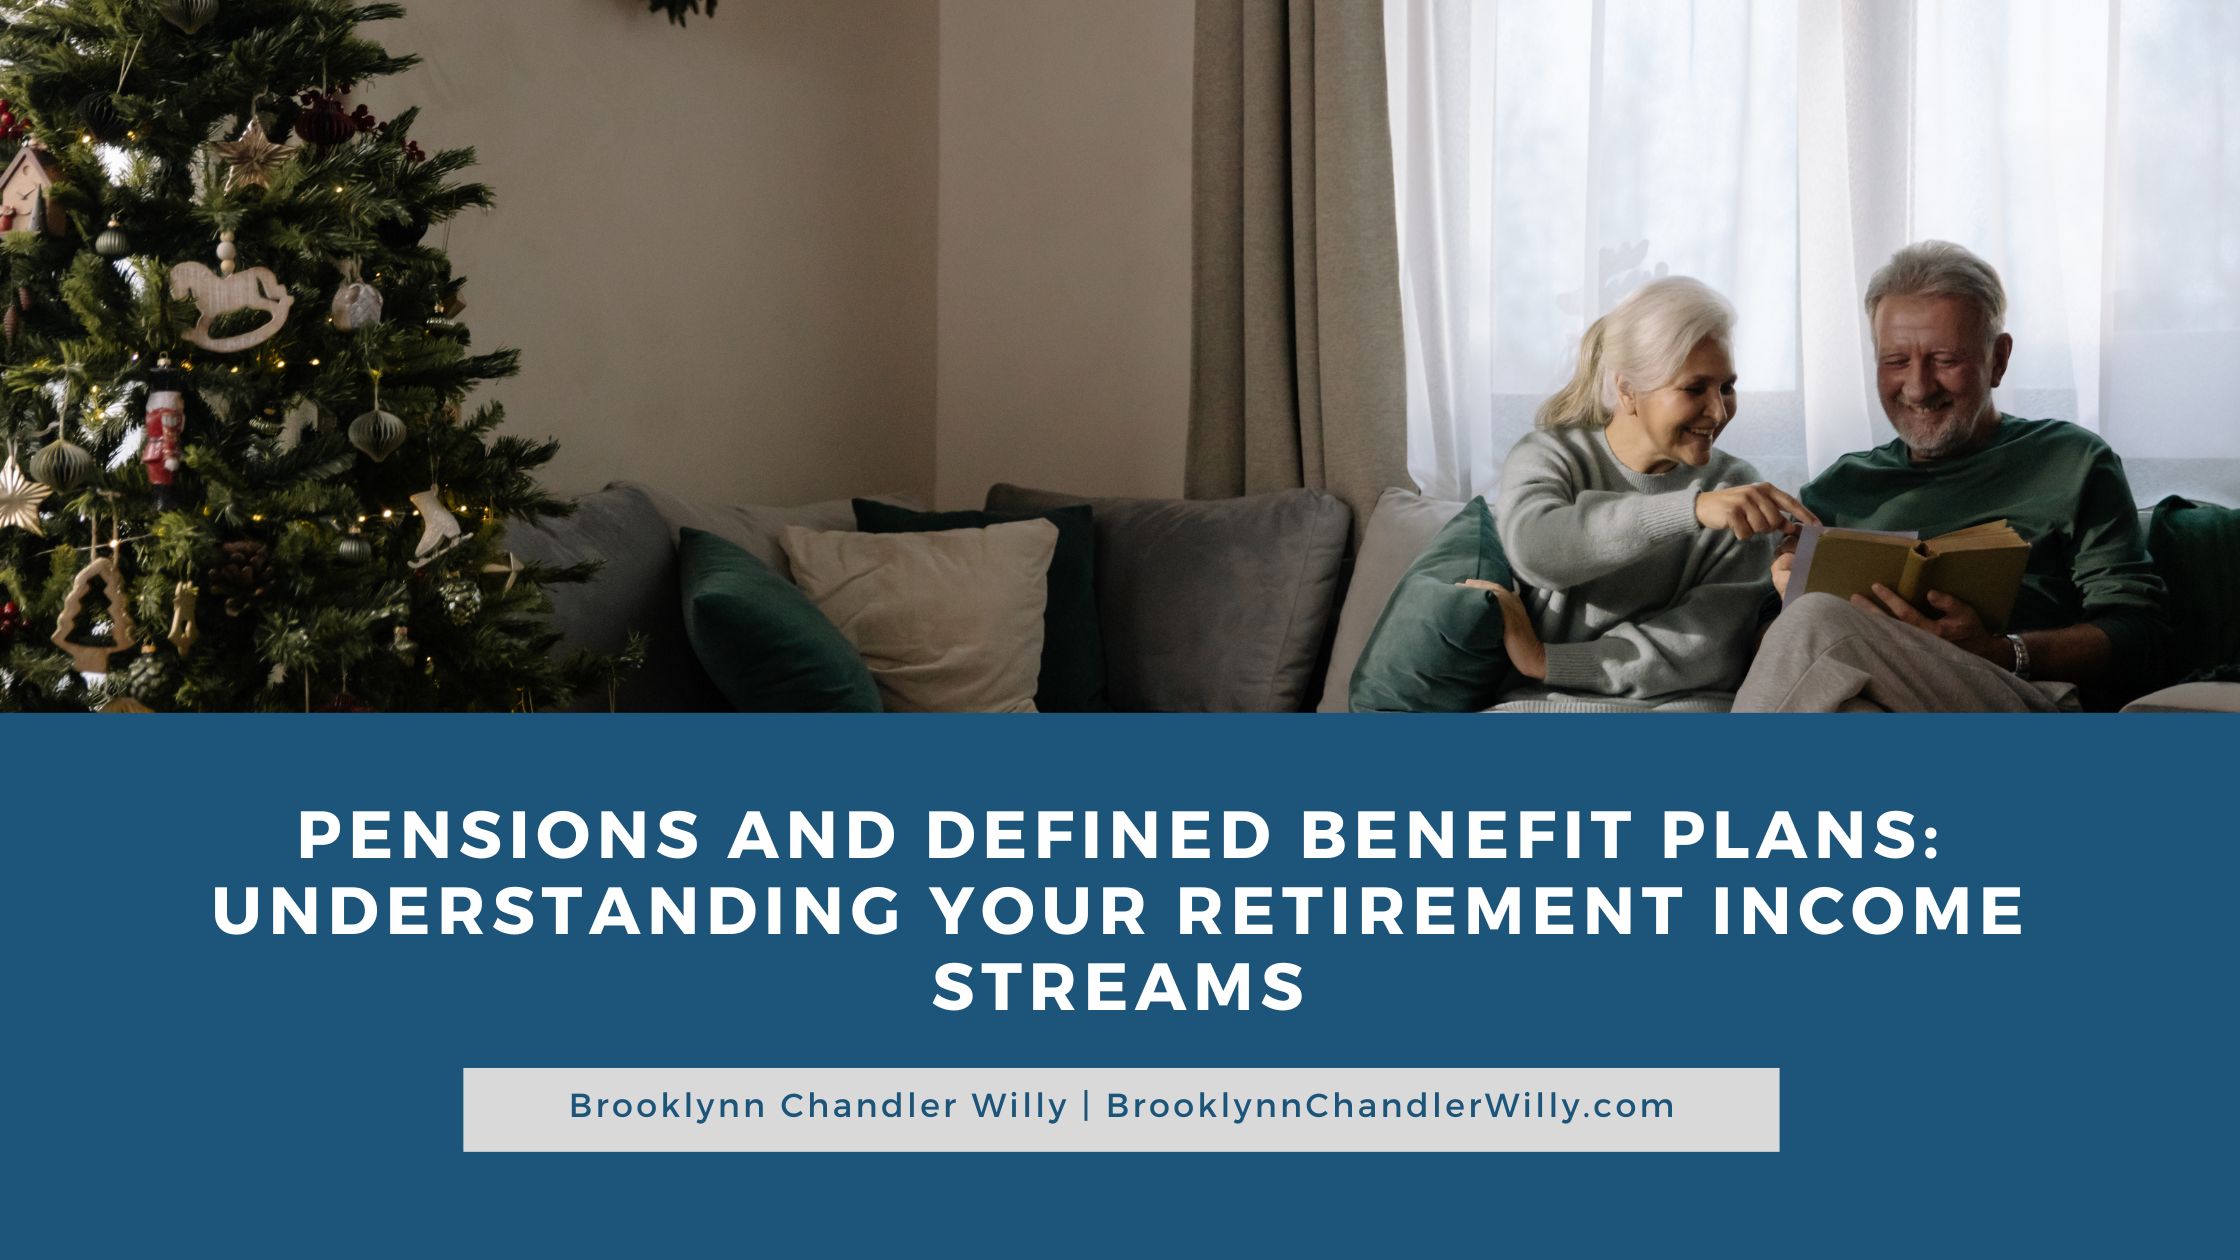 PENSIONS AND DEFINED BENEFIT PLANS:
UNDERSTANDING YOUR RETIREMENT INCOME
STREAMS

Brooklynn Chandler Willy | BrooklynnChandlerWilly.com